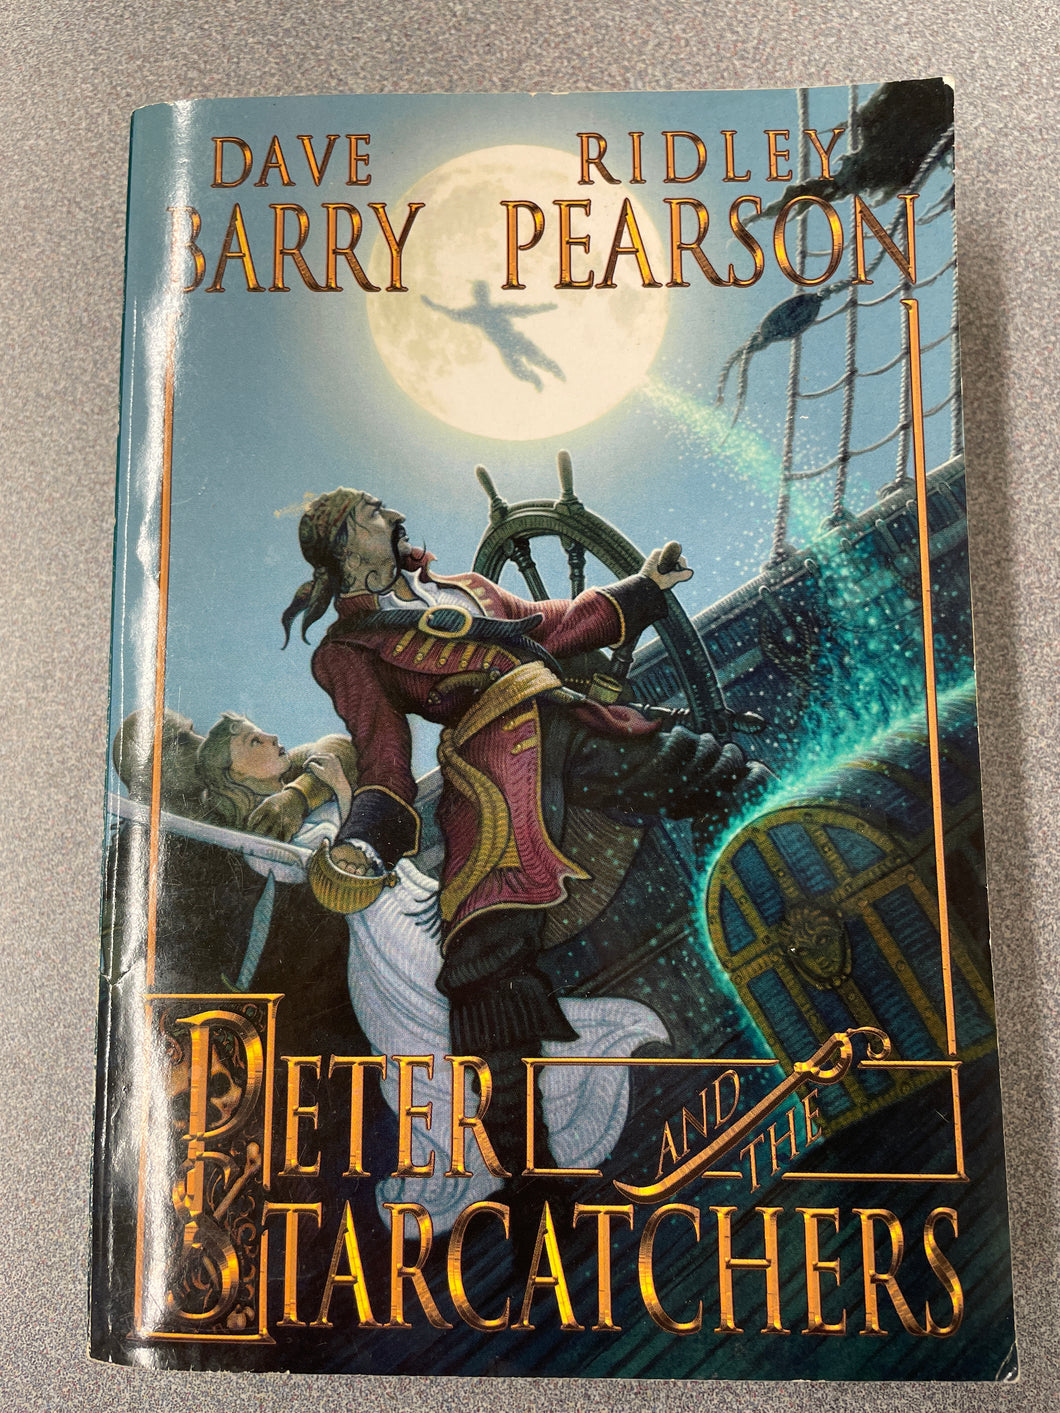 Barry, Dave and Ridley Pearson, Peter and the Starcatchers [2004] YF 12/23